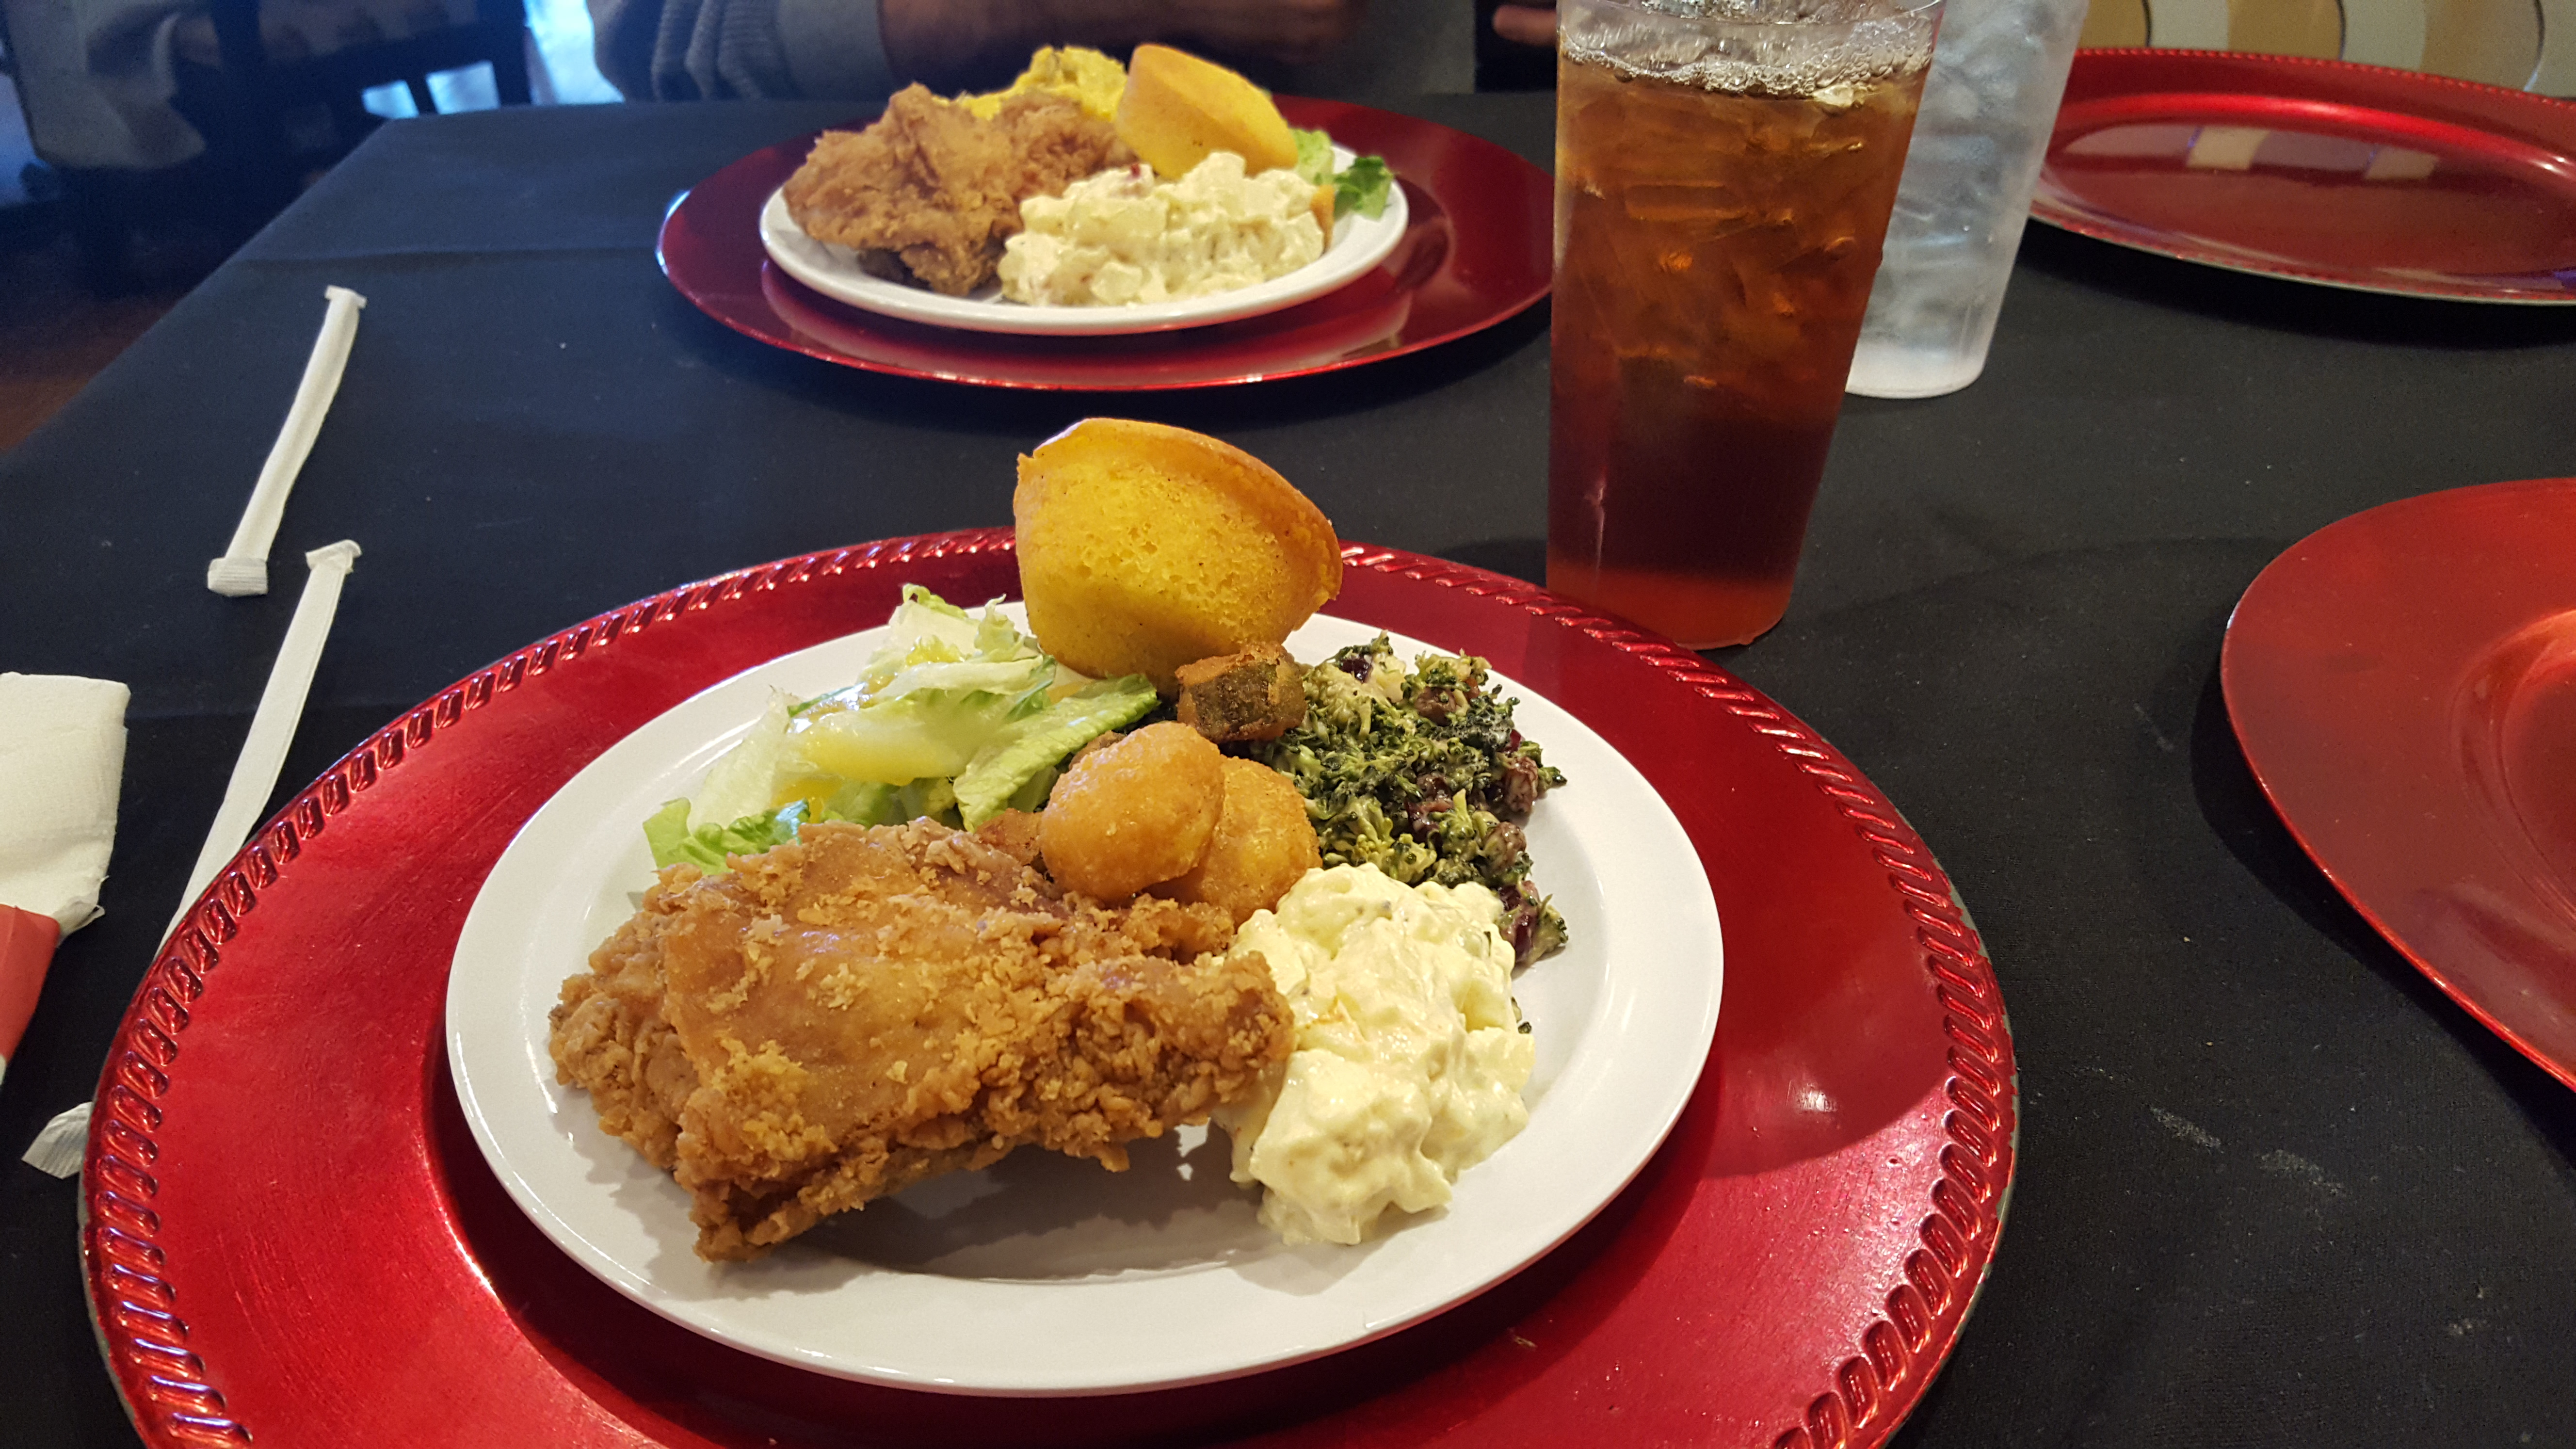 plate of food from the buffet at Martha's Place with fried chicken, cornbread and other southern food items